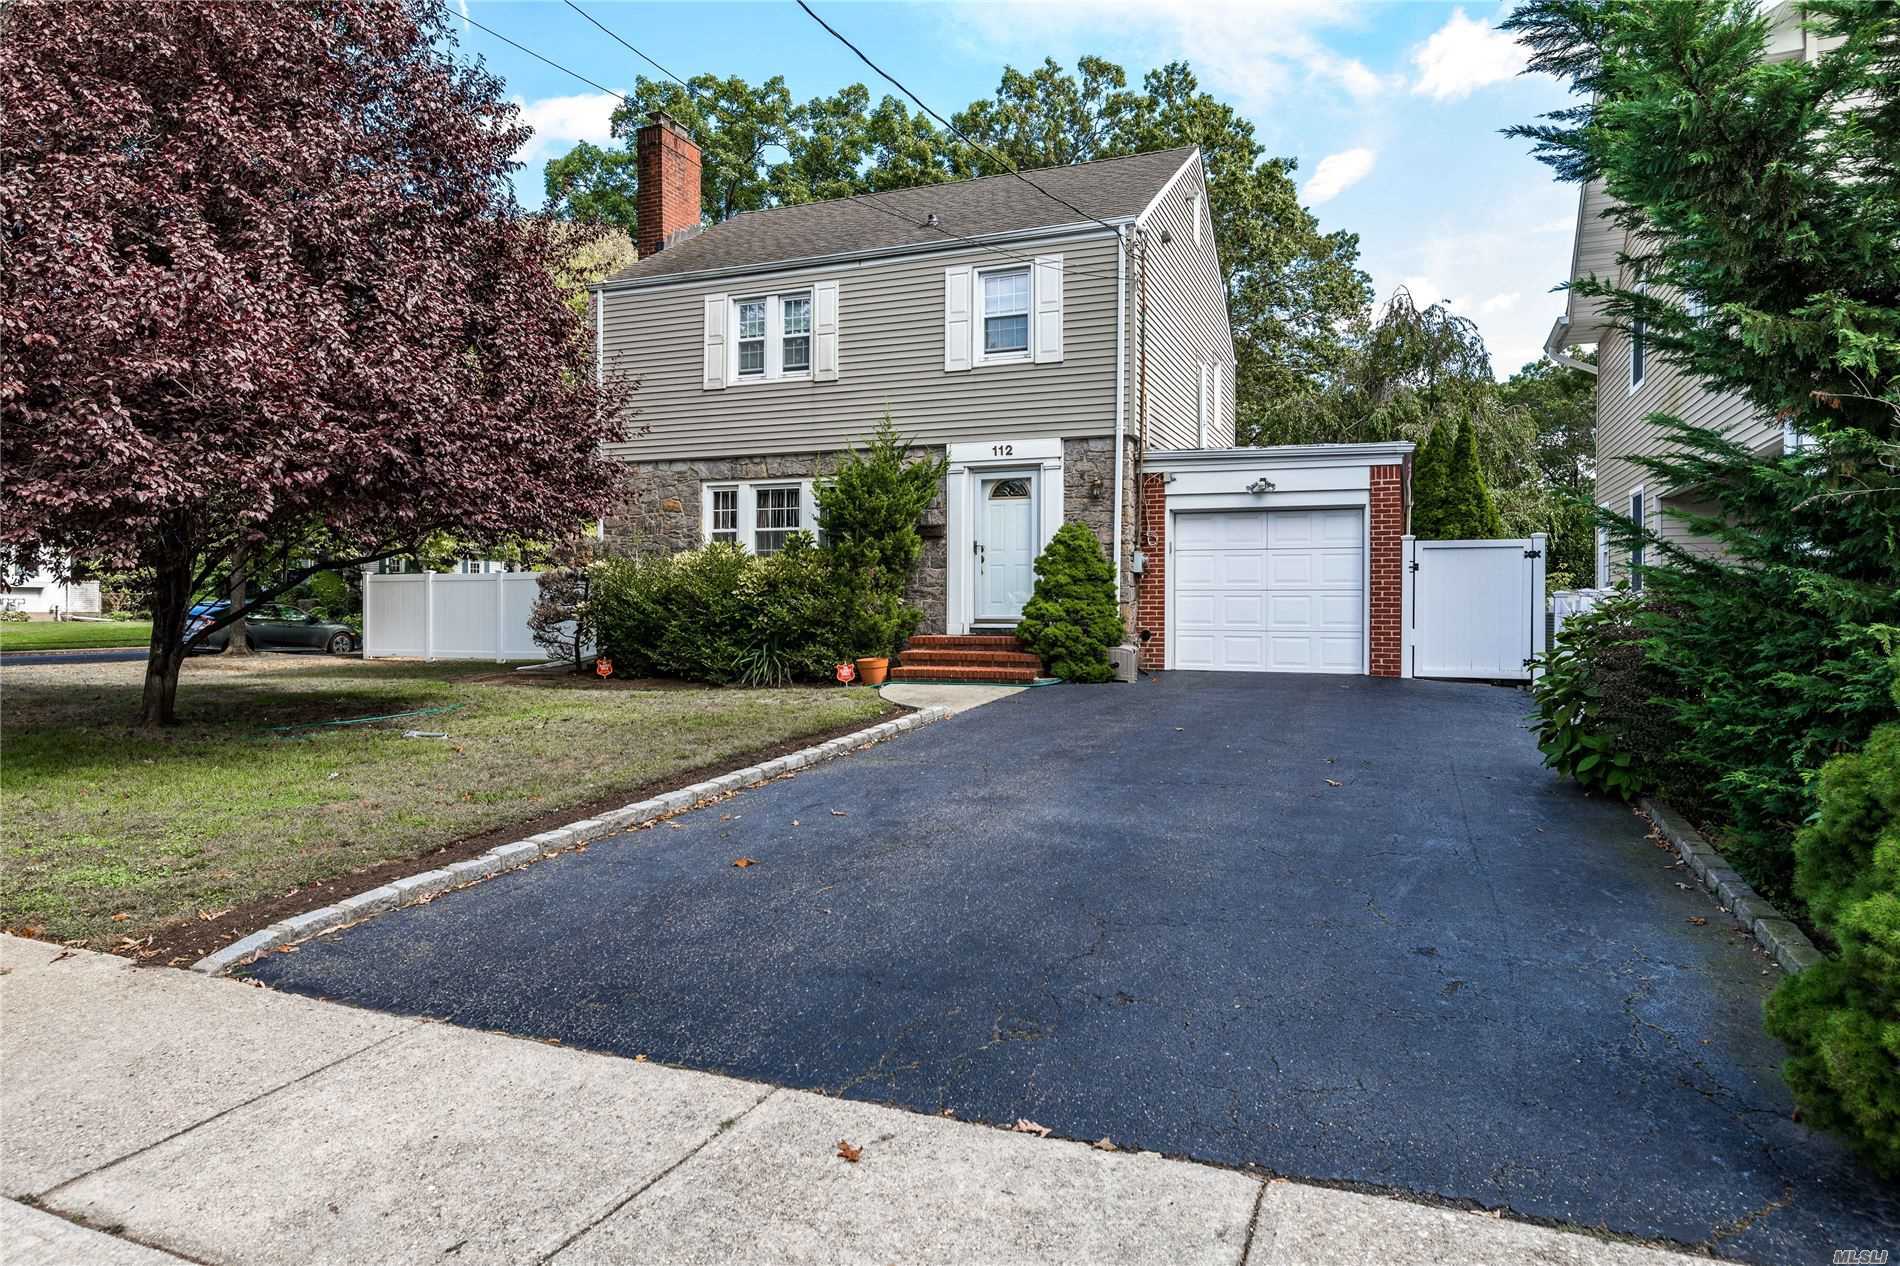 3 Bedroom Side Hall Colonial Set On Oversized Property (75 x 100). House Features Large Living Room With Wood burning Fireplace, Formal Dining Room, Eat-In Kitchen, 3 Large Bedrooms, New Bathrooms, New Roof, CAC, New Gas Burner, Gas HWH, And More.